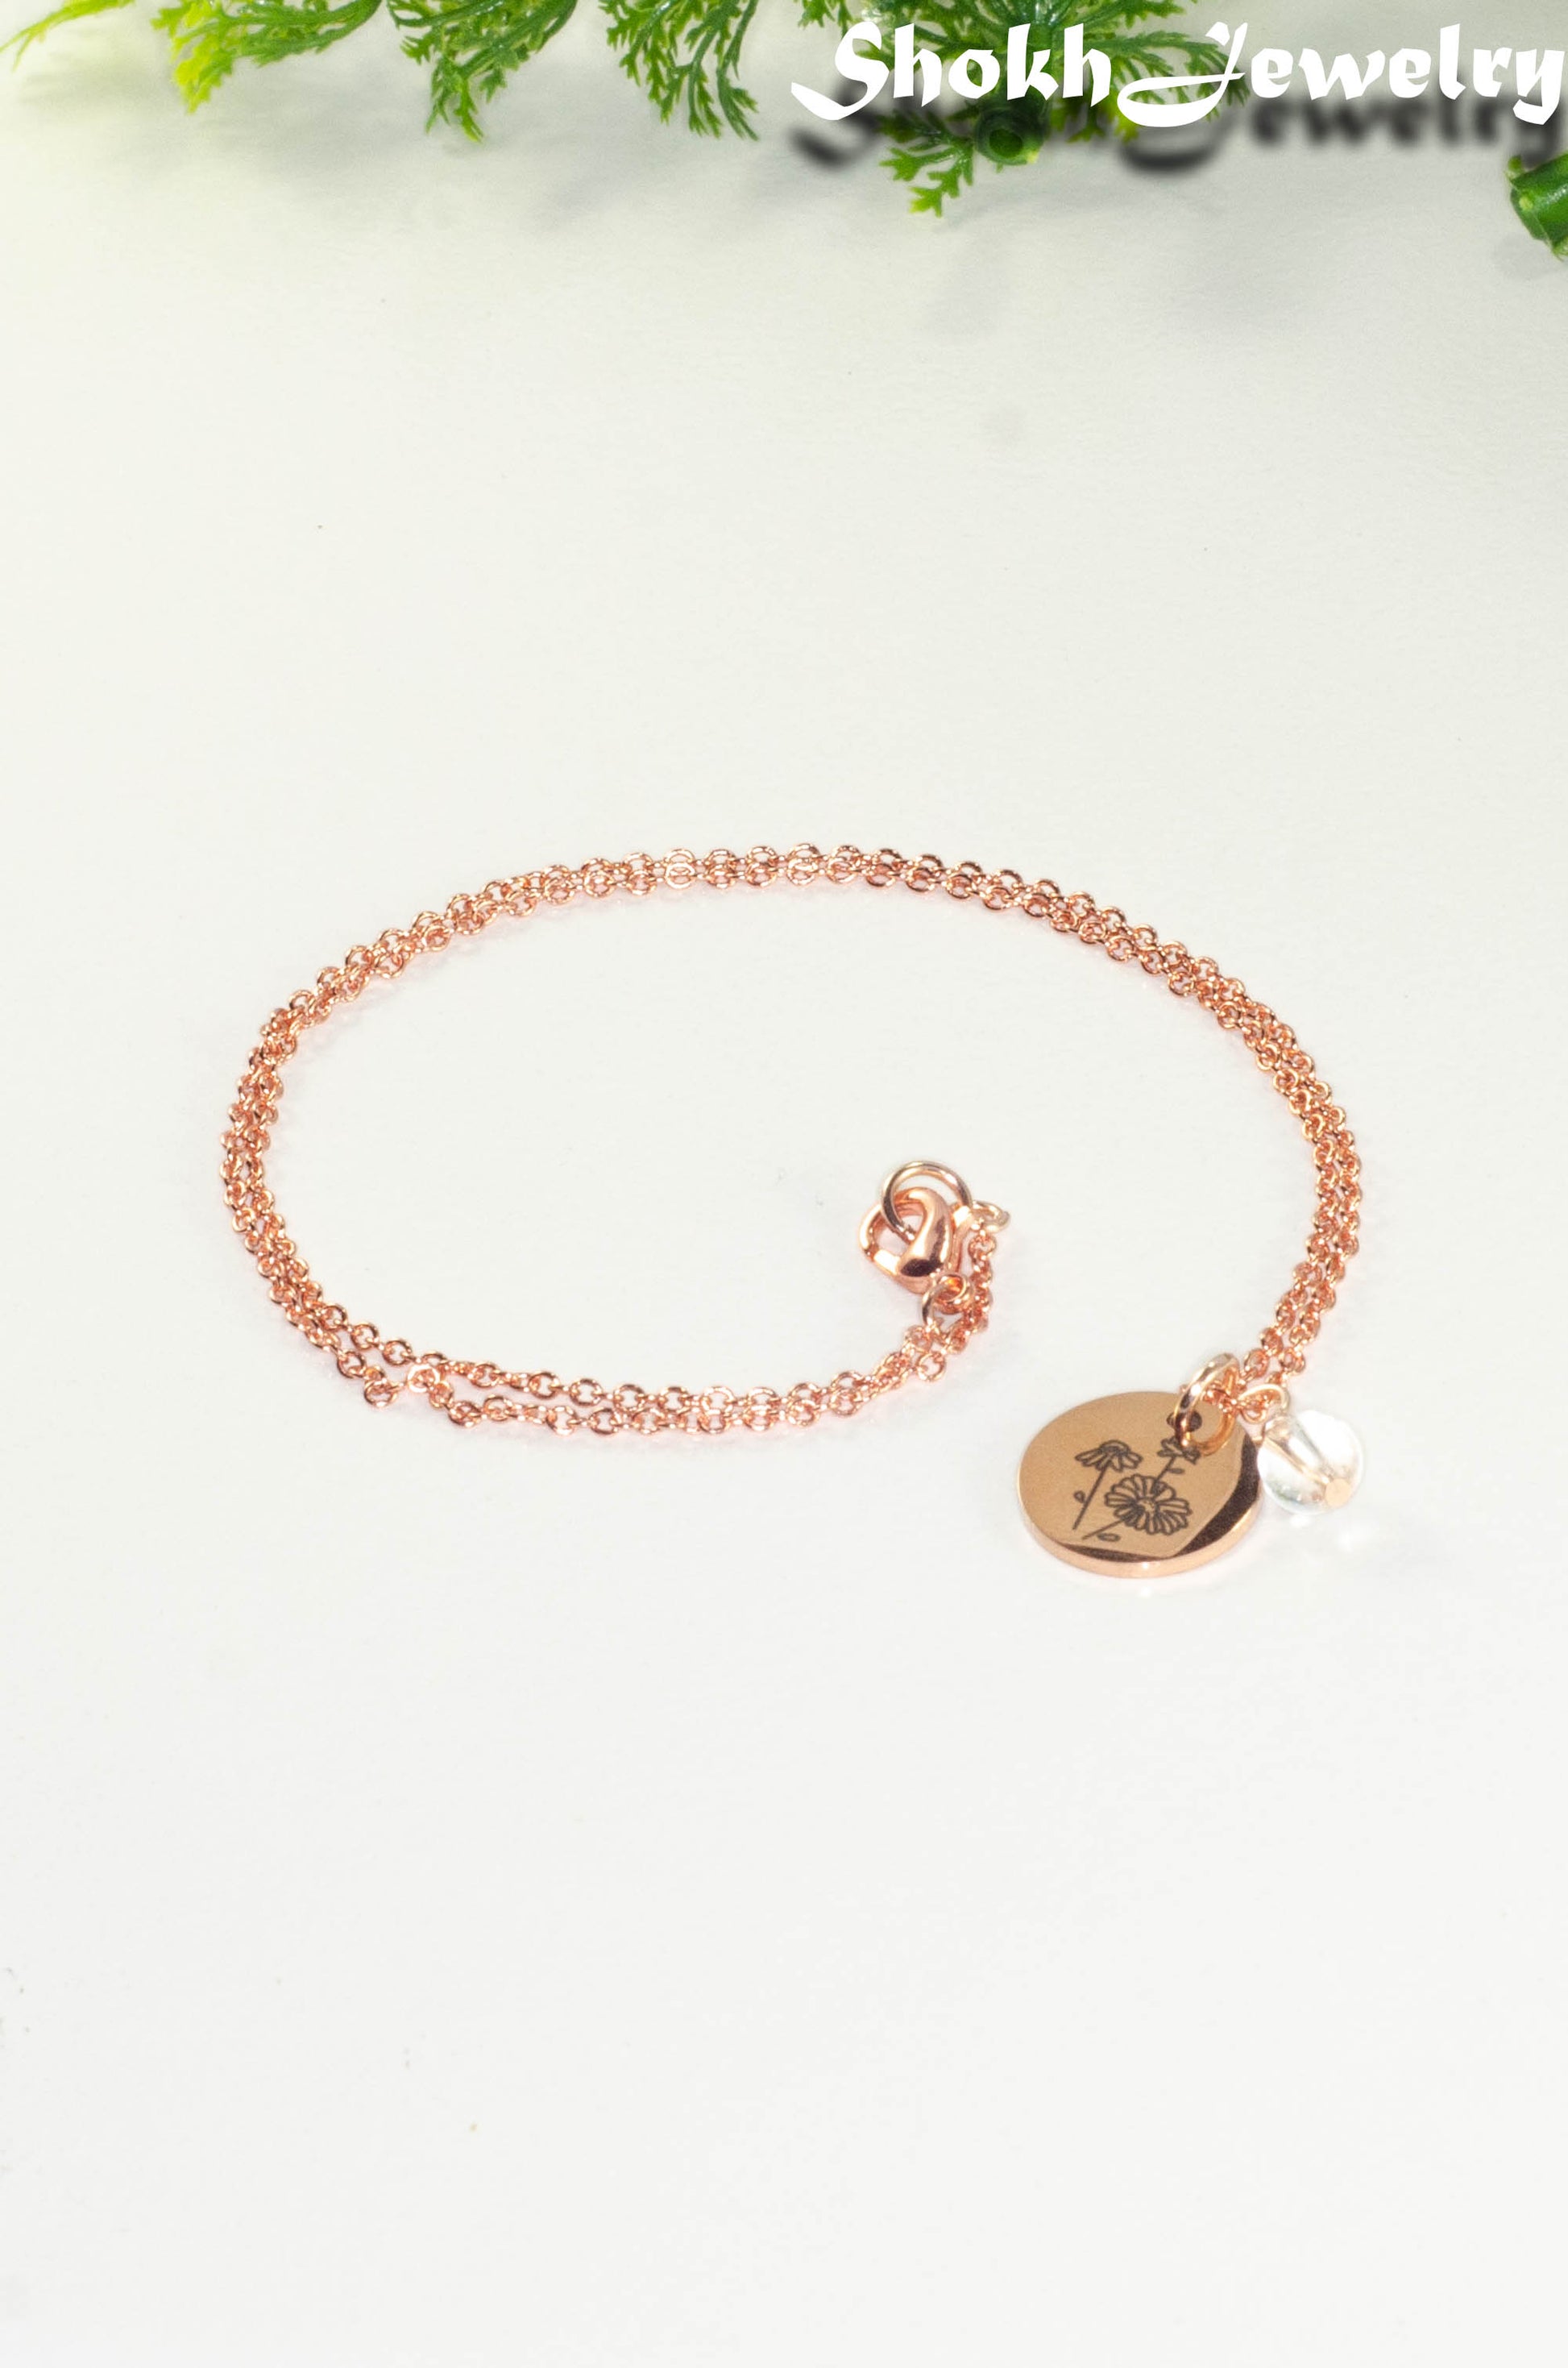 Rose Gold Plated April Birth Flower Necklace with Clear Quartz Birthstone Pendant.